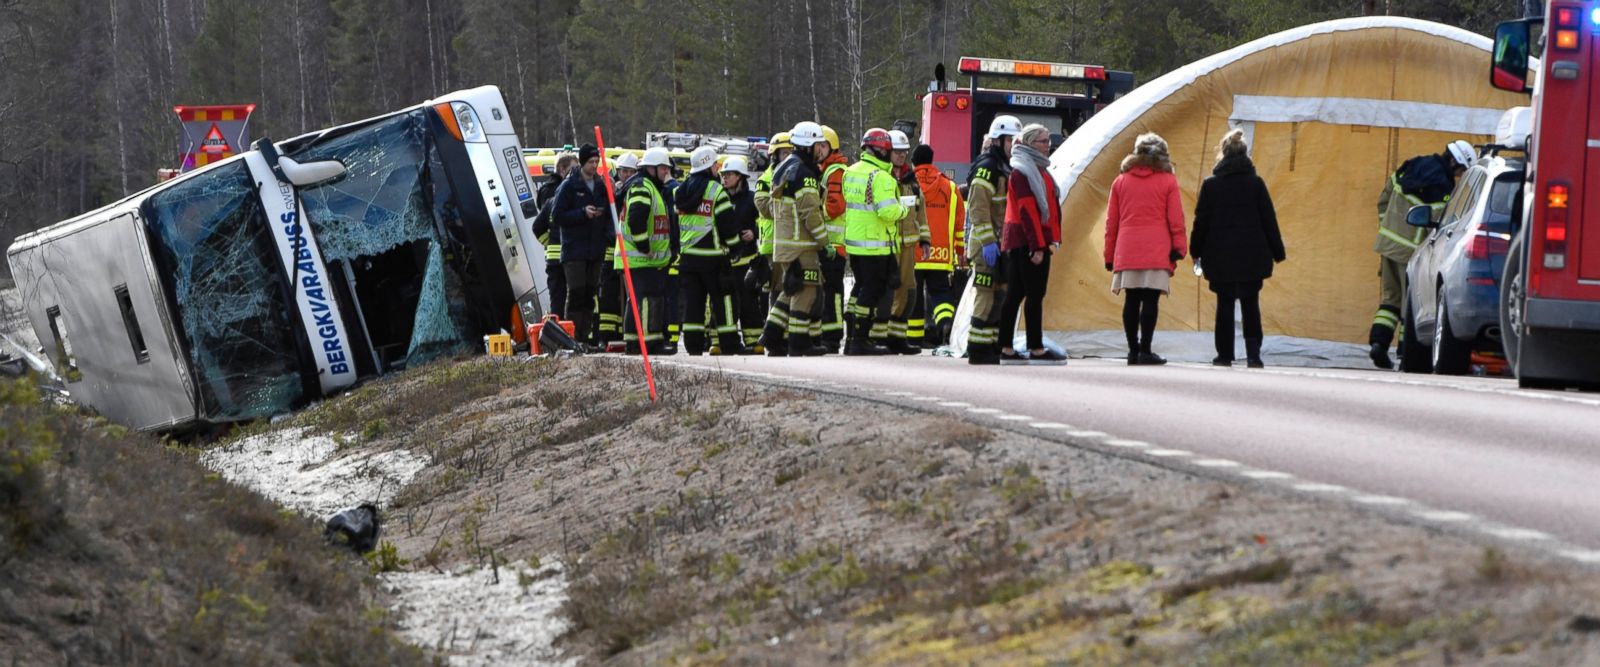 Swedish bus crashes, 25 reported injured, including children